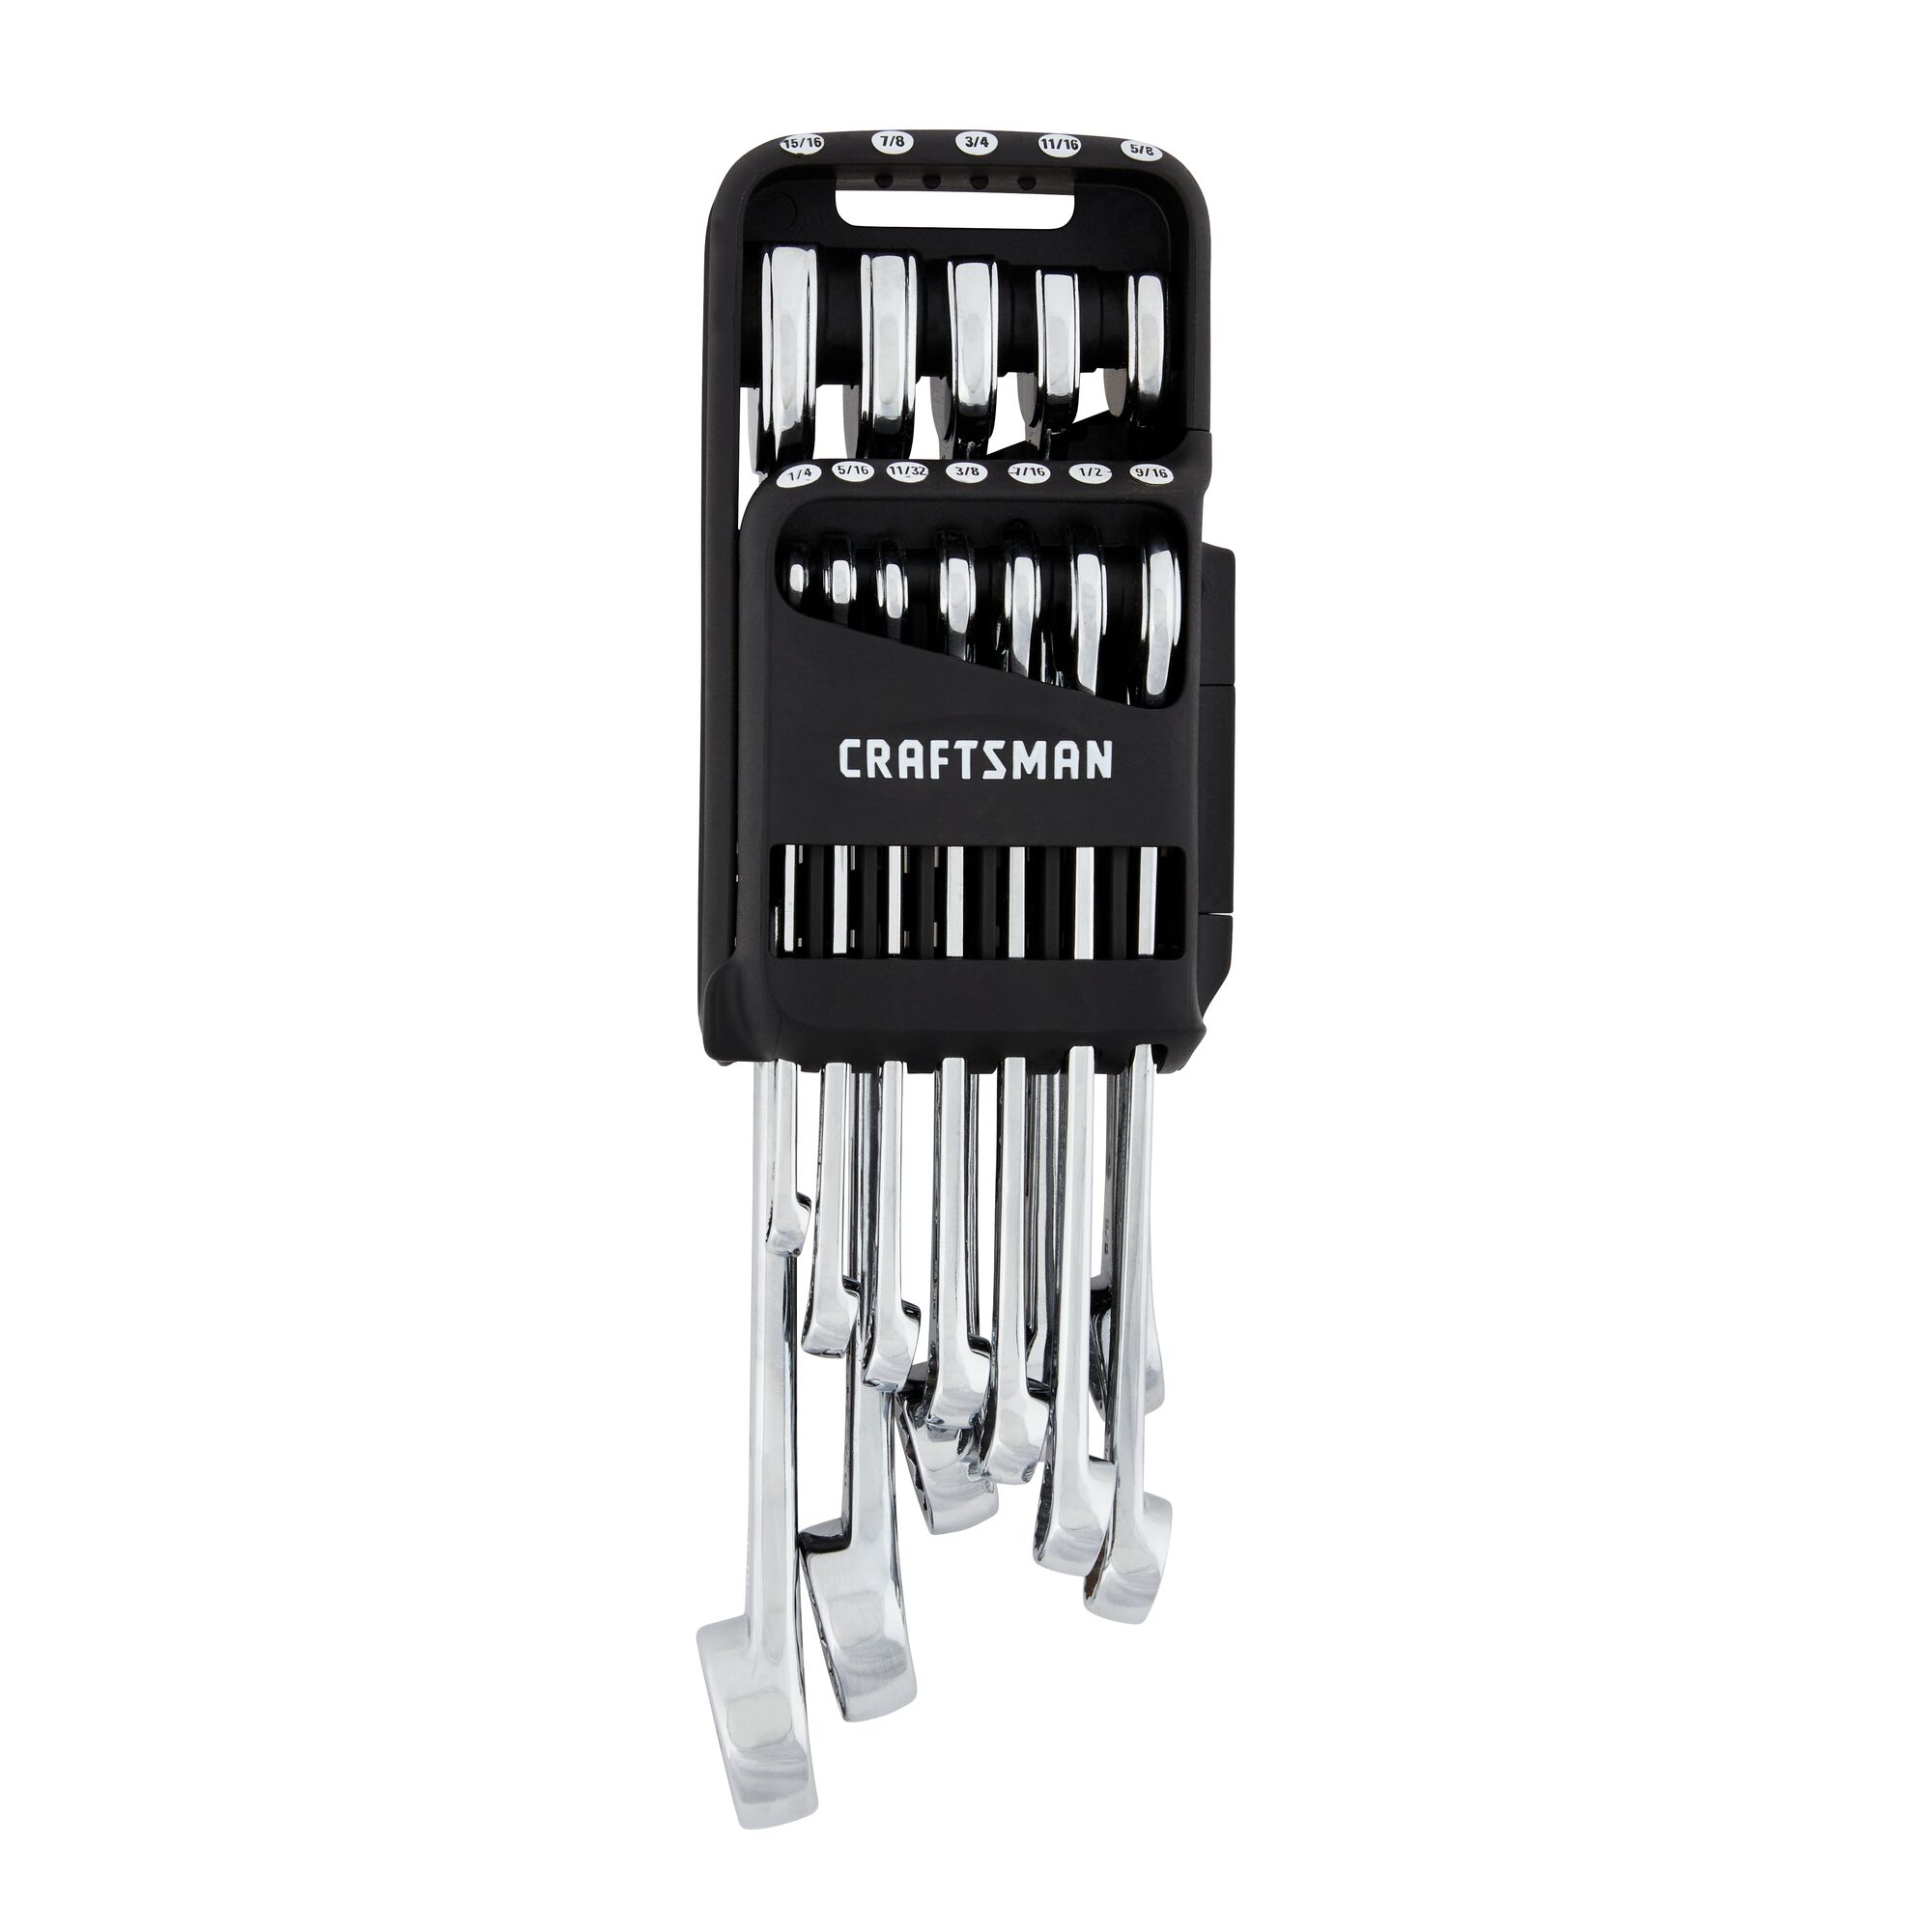 V series S A E combination wrench set (12 piece) in packaging.